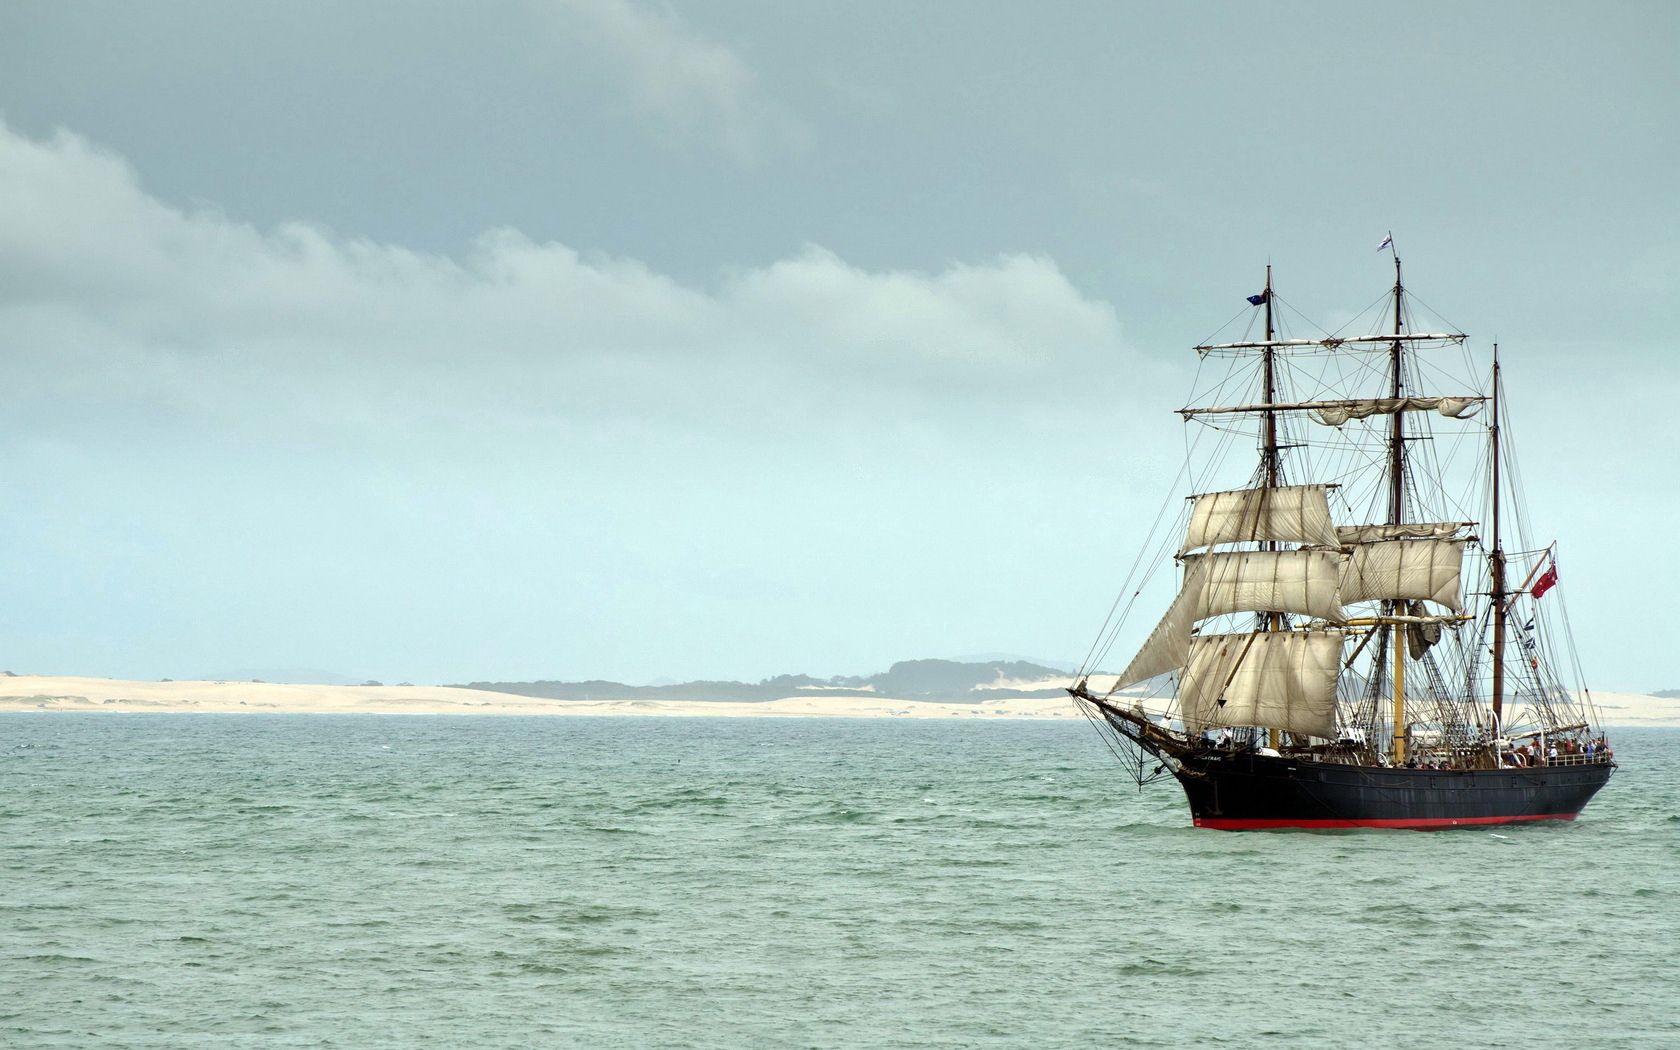 59499 download wallpaper landscape, nature, sea, sail, sails, ship screensavers and pictures for free